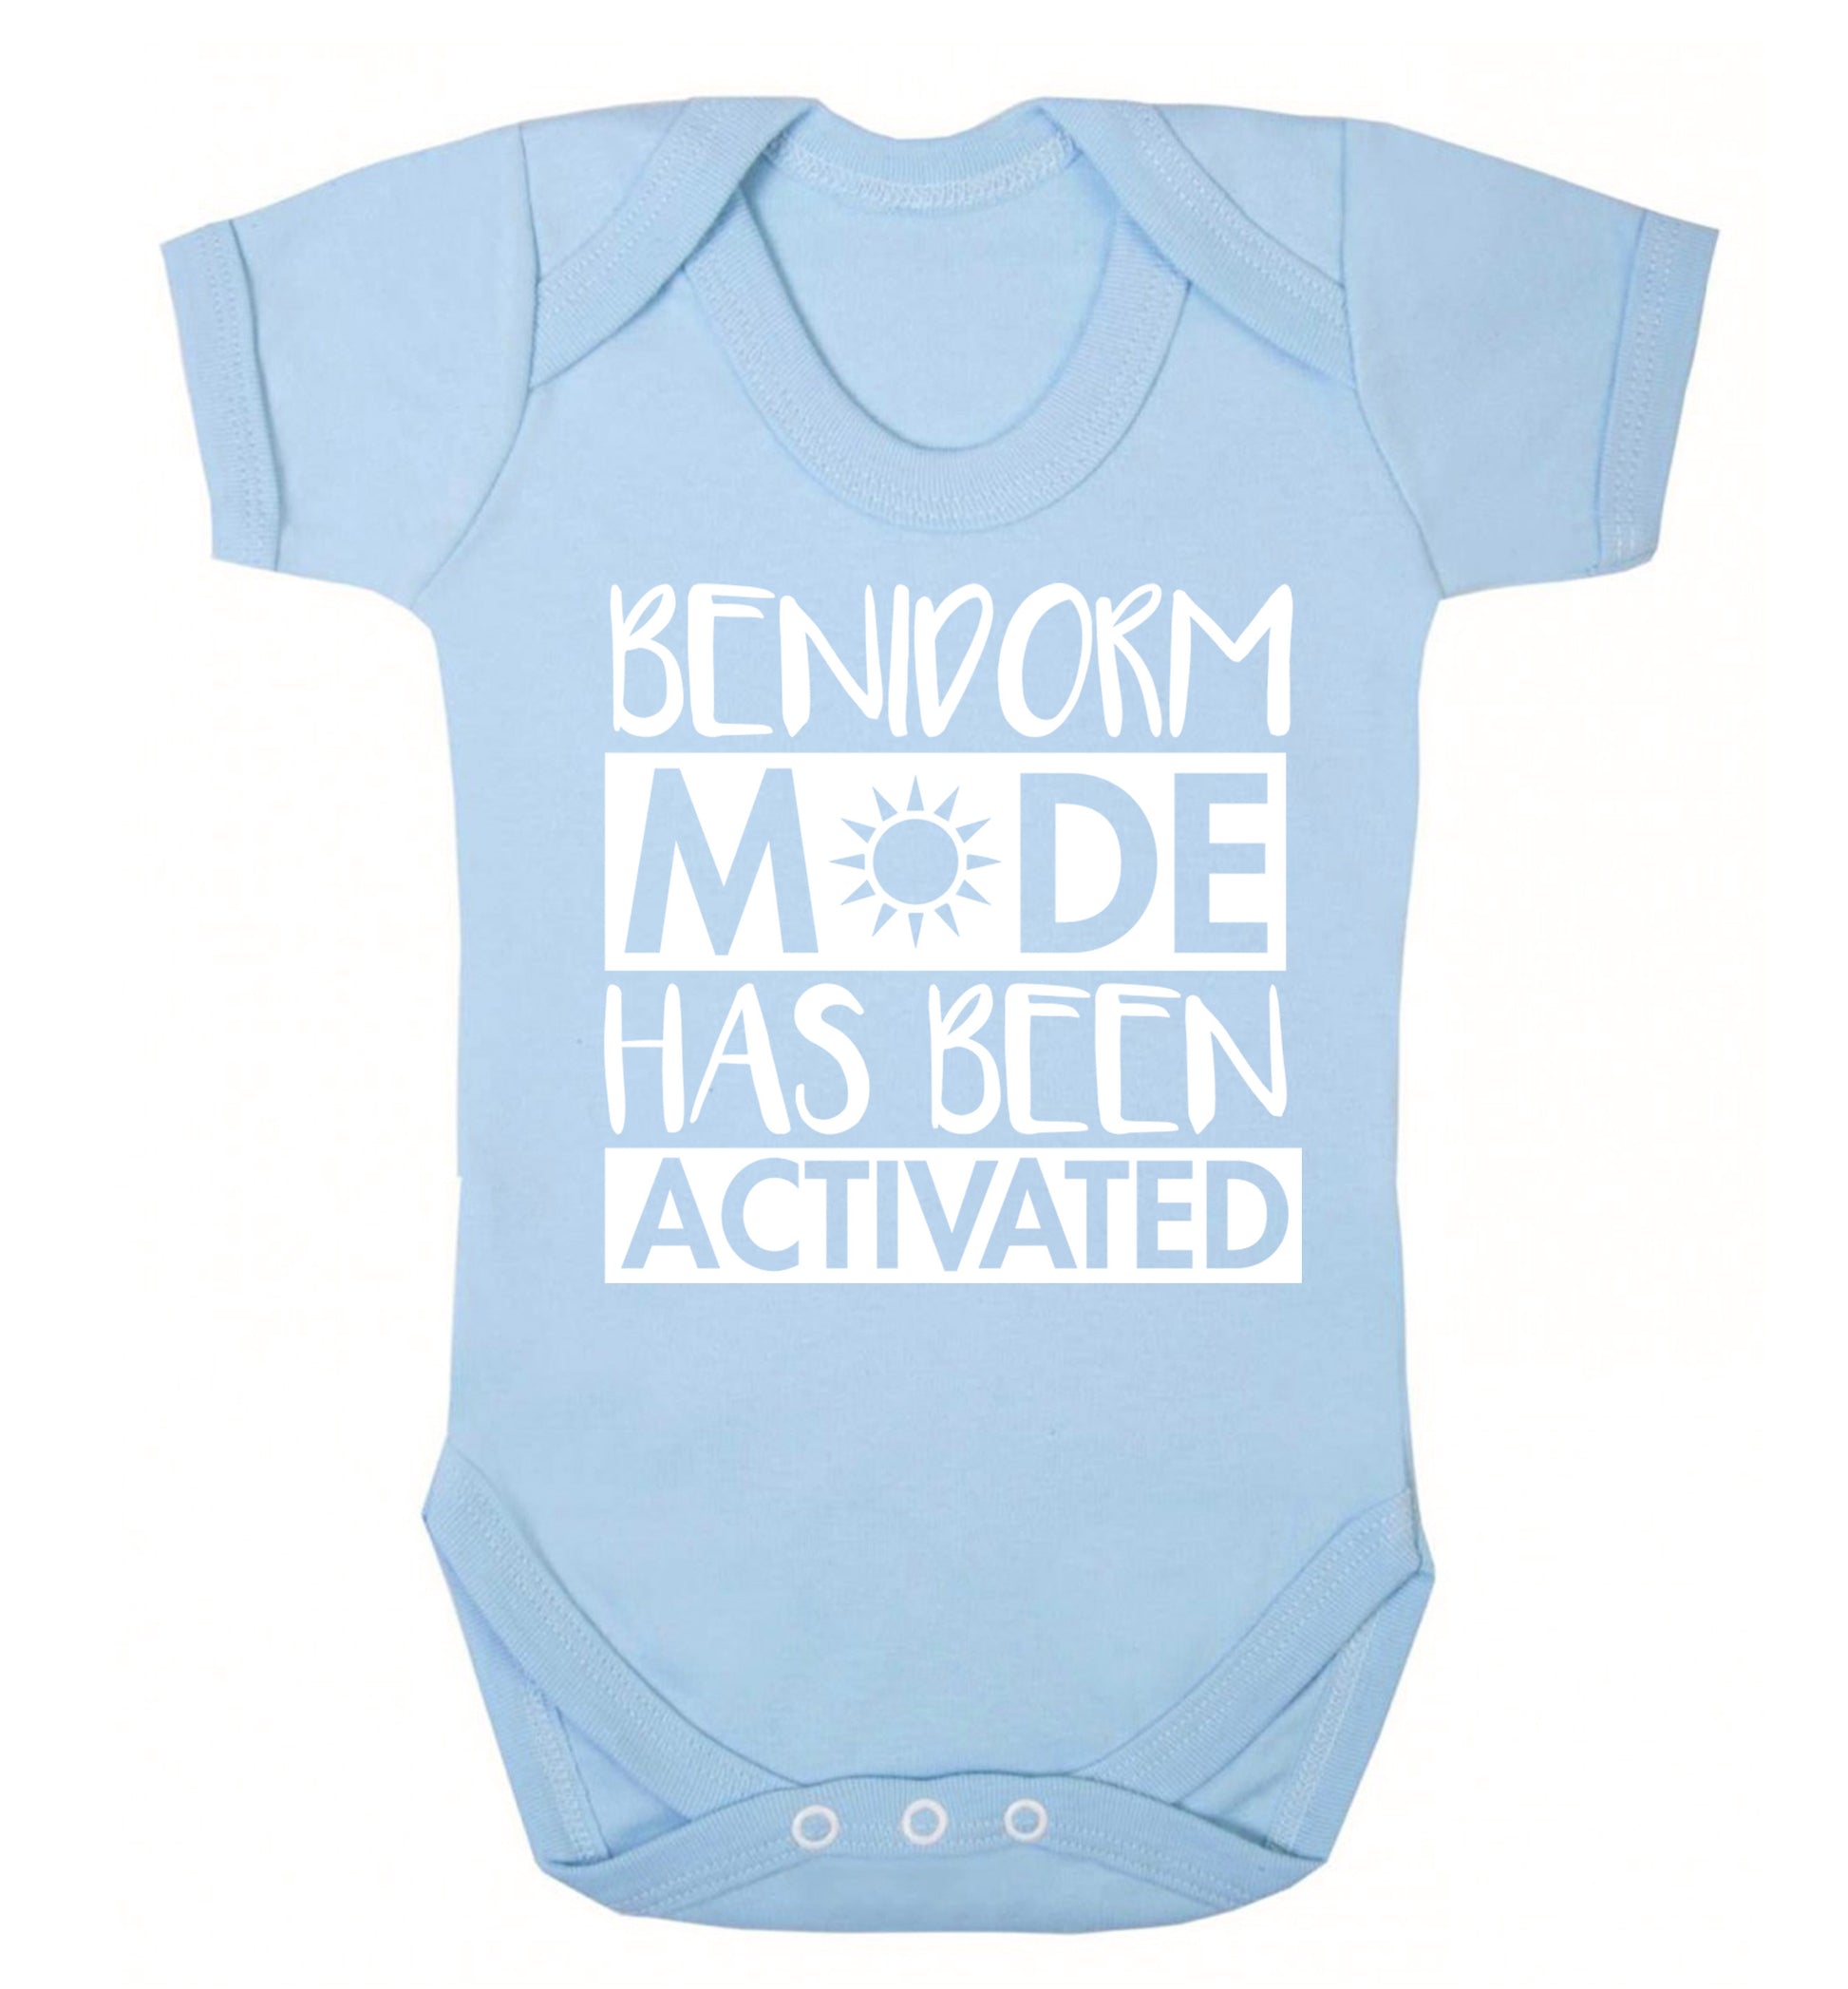 Benidorm mode has been activated Baby Vest pale blue 18-24 months